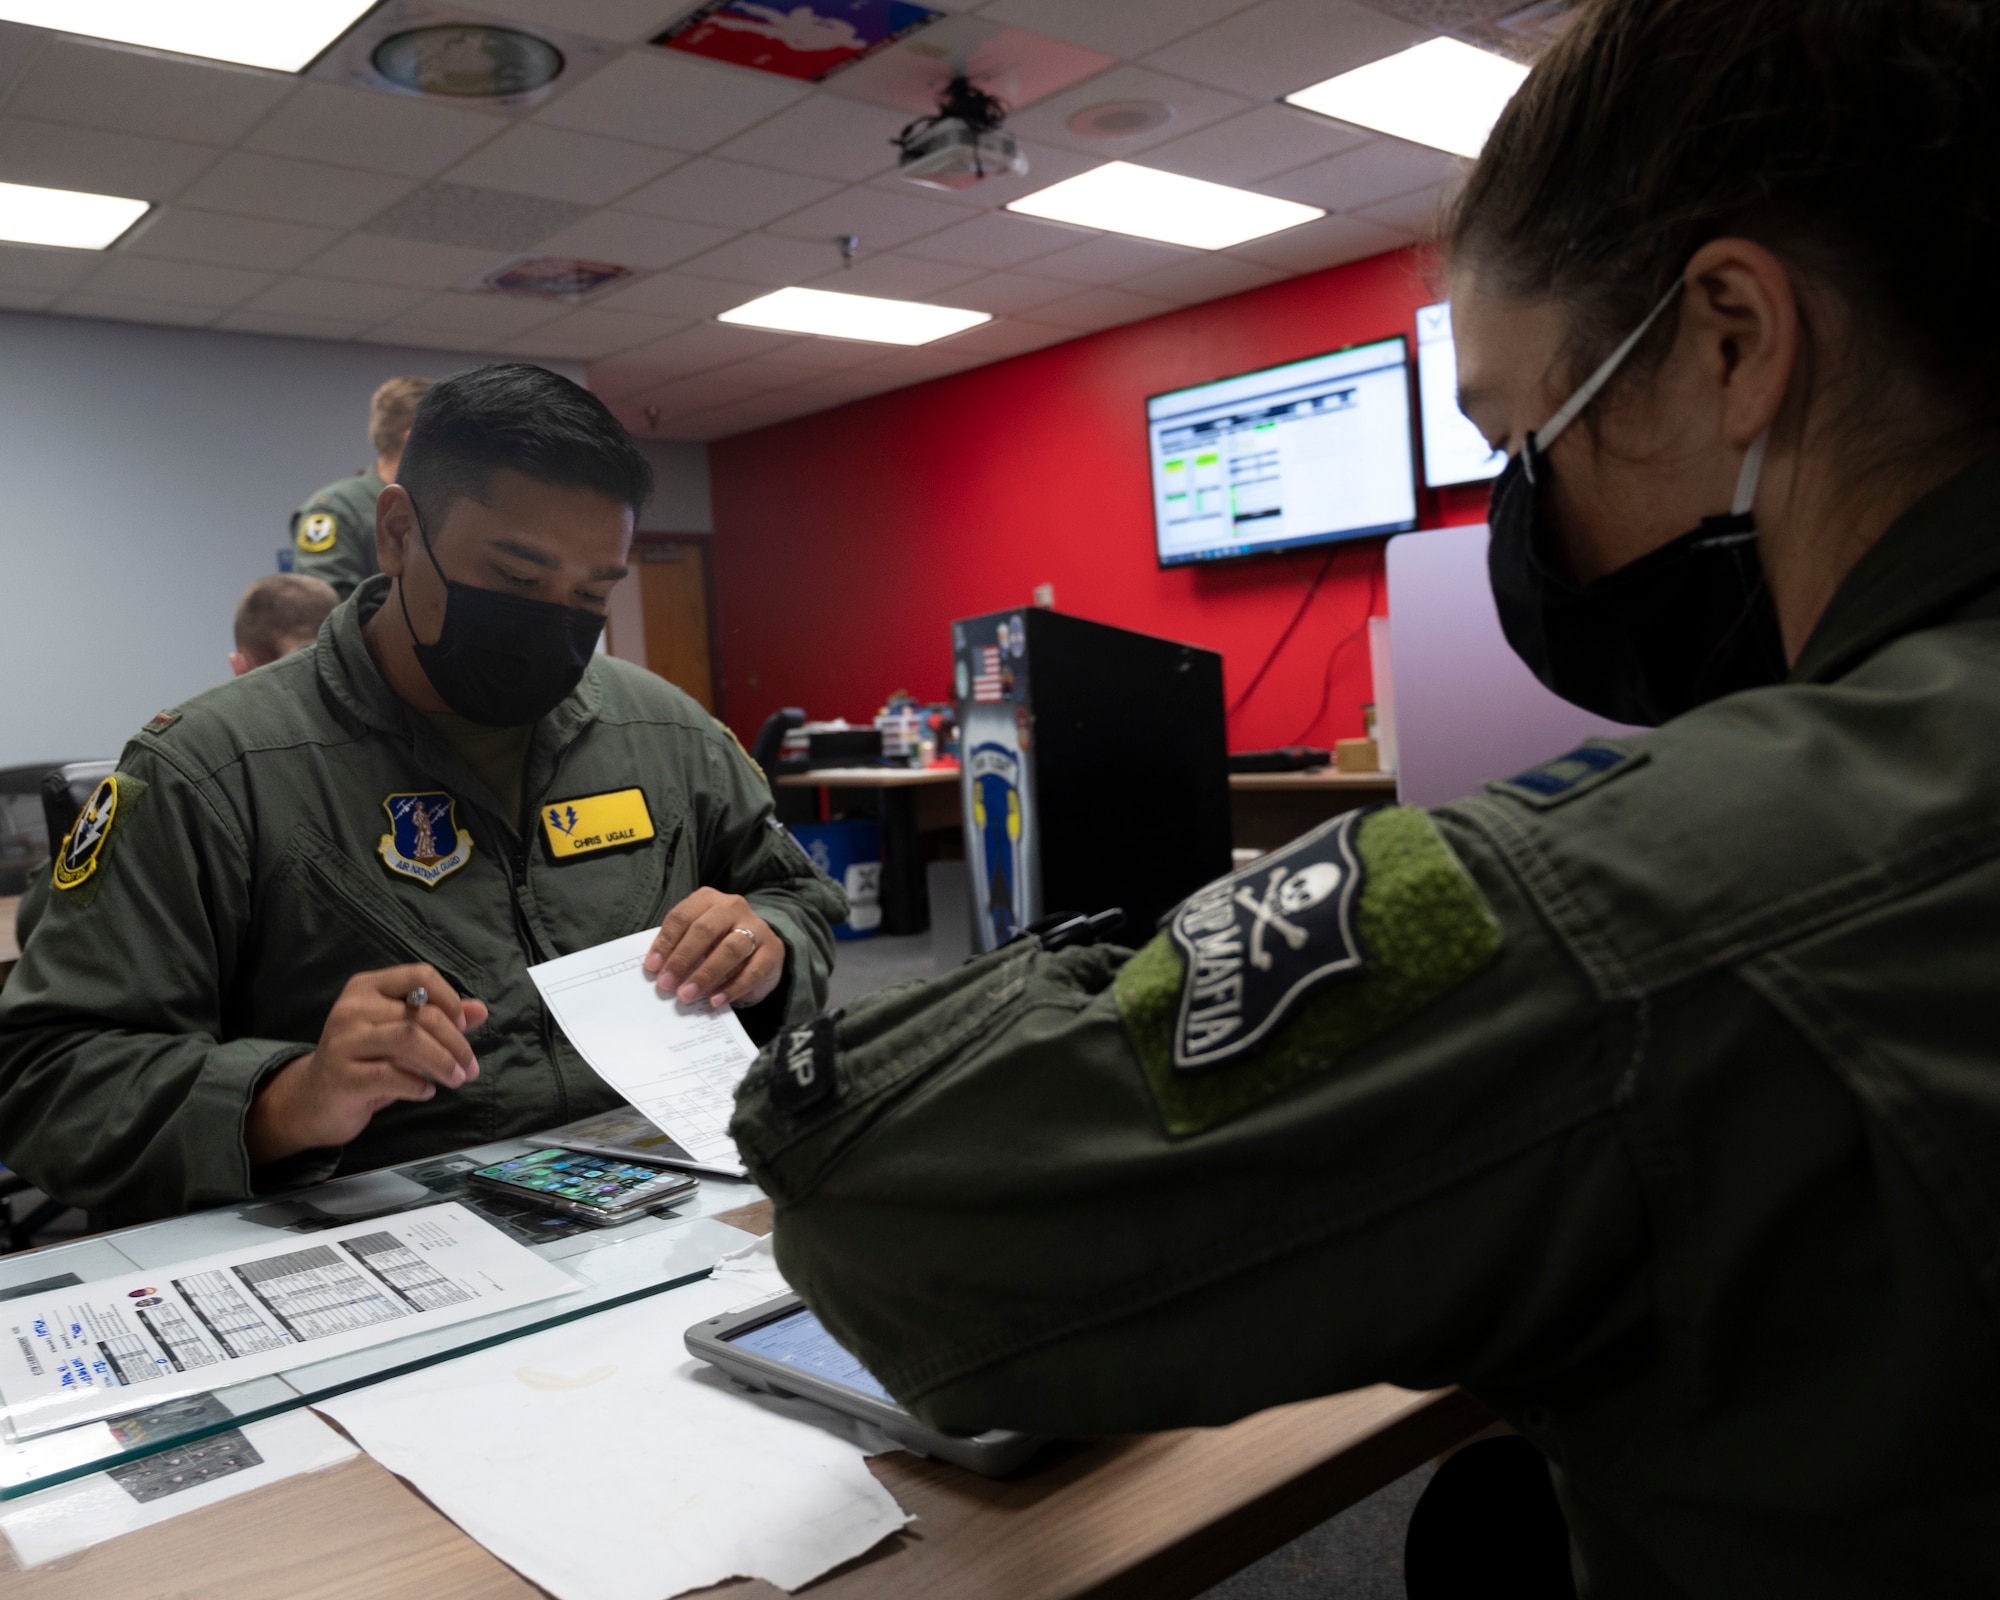 U.S. Air Force 2nd Lt. Christopher Ugale, a student pilot with the 47th Student Squadron, goes over the pre-flight brief with U.S. Air Force Capt. Sarah Fotsch at Laughlin Air Force Base, Texas on August 4, 2021. The pre-flight brief covers the plan for the flight as well as looking at bird levels, visibility, and other required information. (U.S. Air Force Photo by Senior Airman Nicholas Larsen)